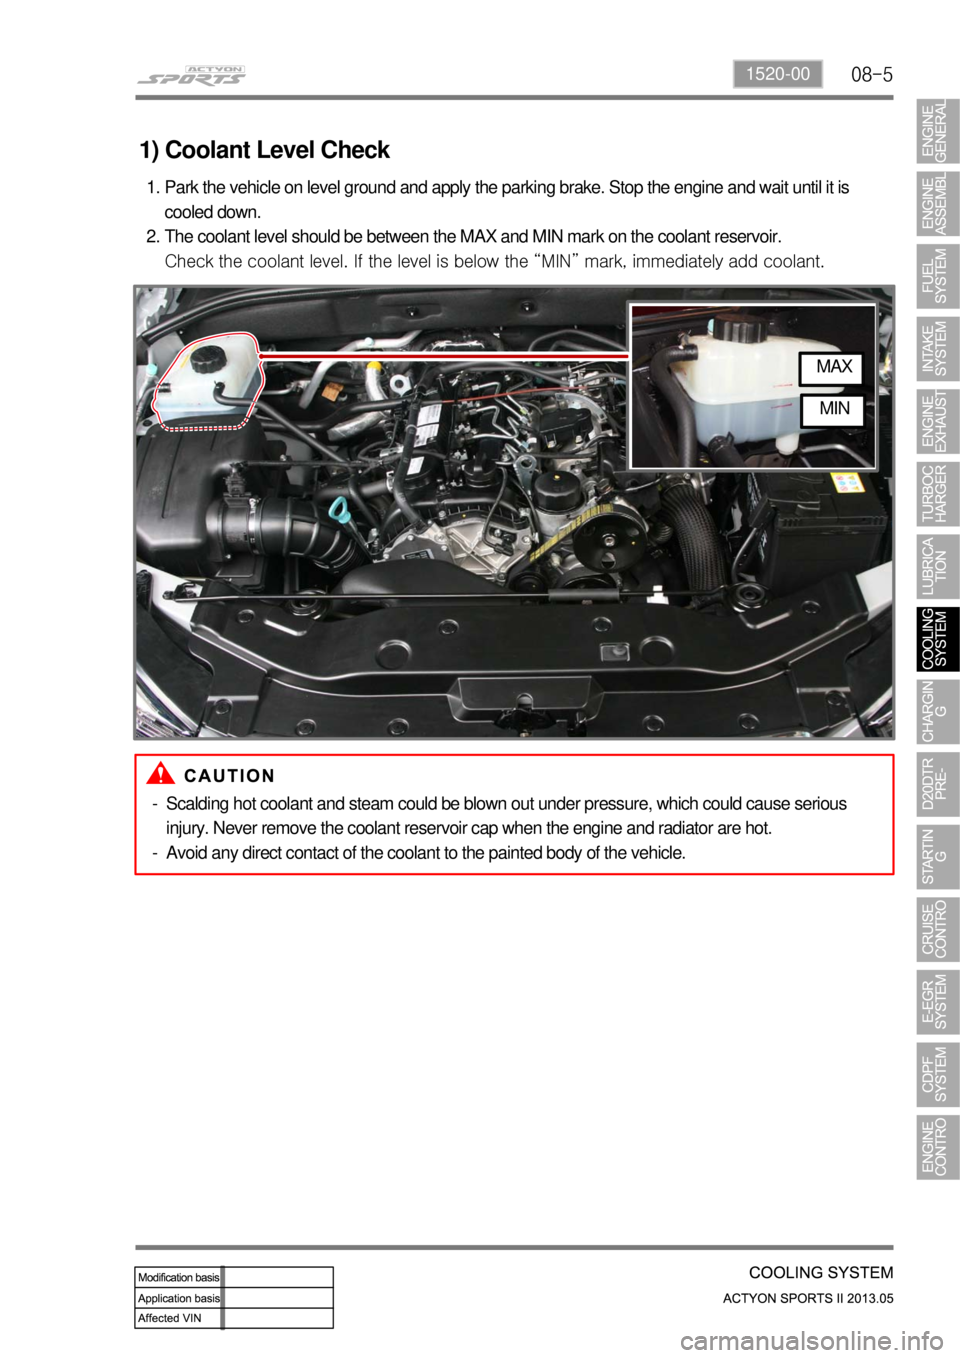 SSANGYONG NEW ACTYON SPORTS 2013  Service Manual 08-51520-00
1) Coolant Level Check
Park the vehicle on level ground and apply the parking brake. Stop the engine and wait until it is 
cooled down.
The coolant level should be between the MAX and MIN 